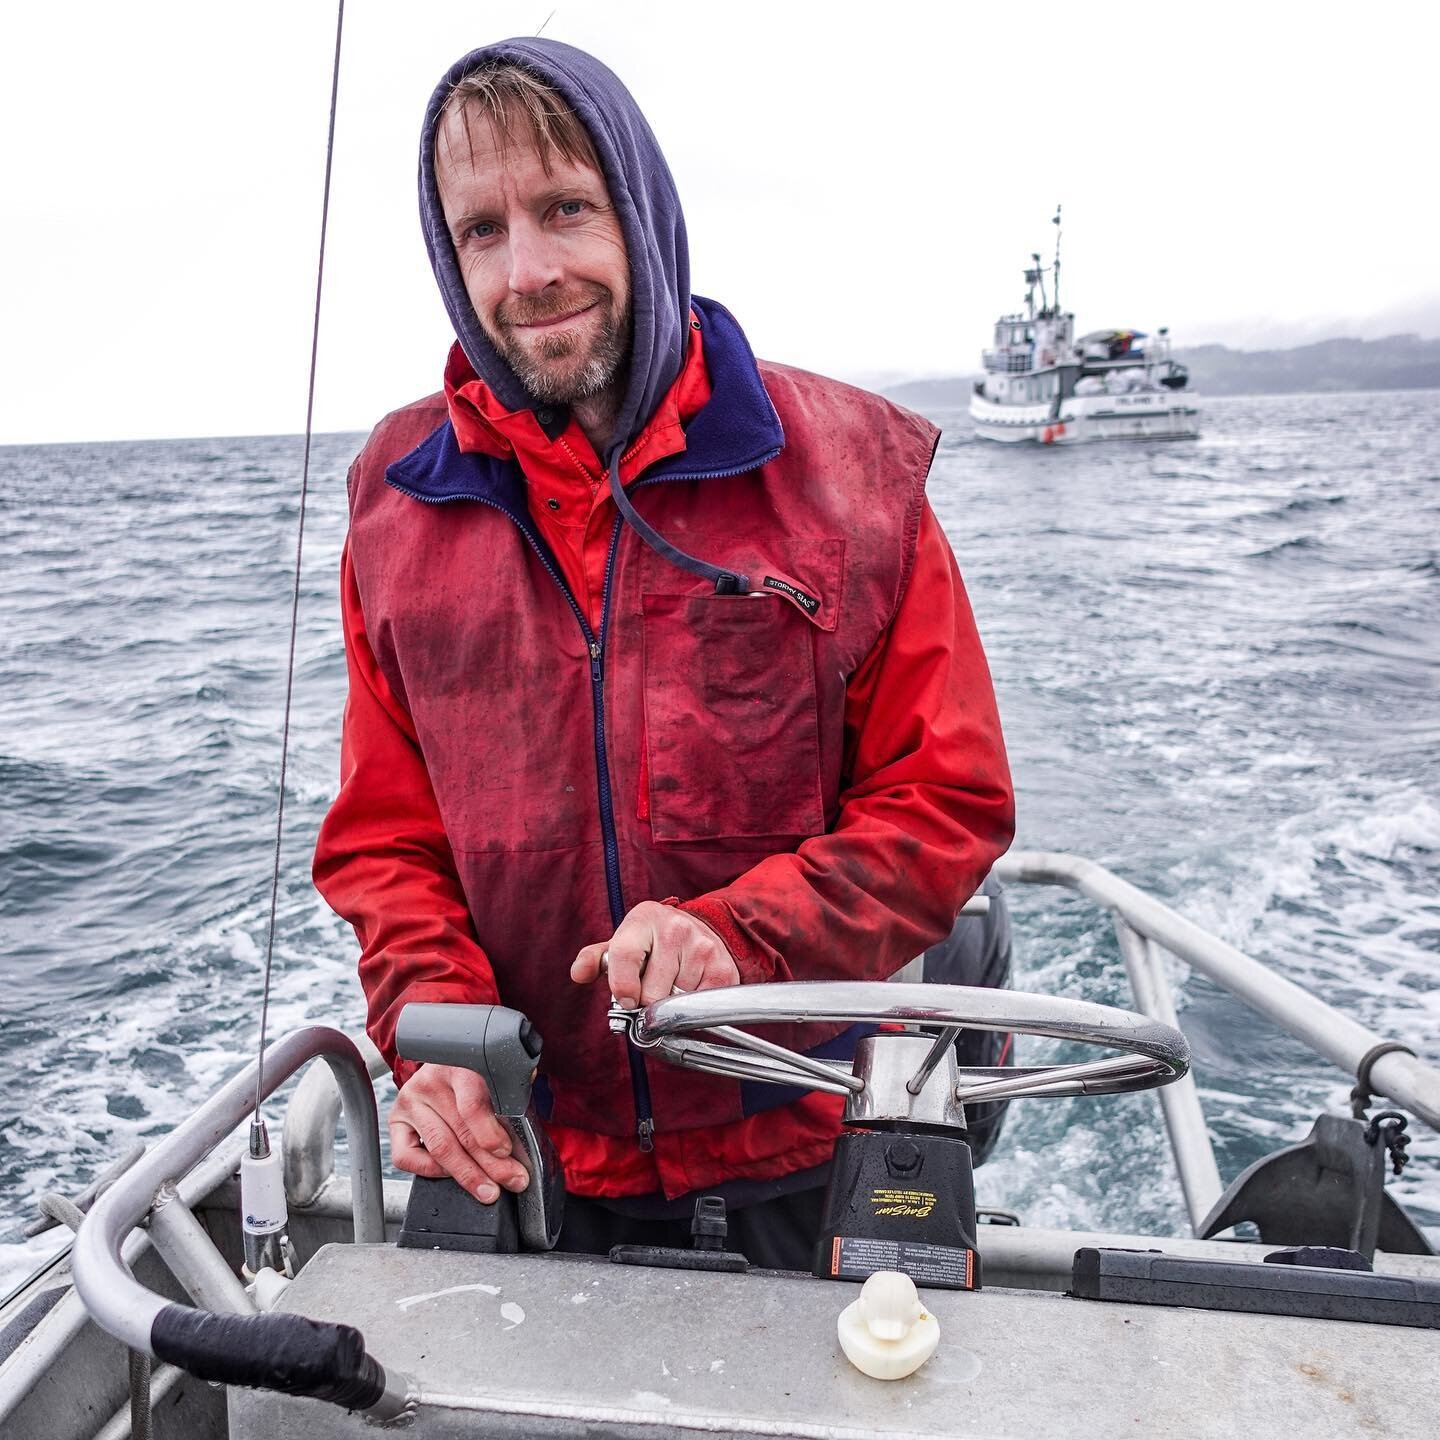 Capt. Andy Schroeder is a co-founder of the Ocean Plastics Recovery Project, and has dedicated his career to restoring pristine habitat to Alaska&rsquo;s coastline and raising awareness about the sources, impacts, and scale of the ocean plastics prob